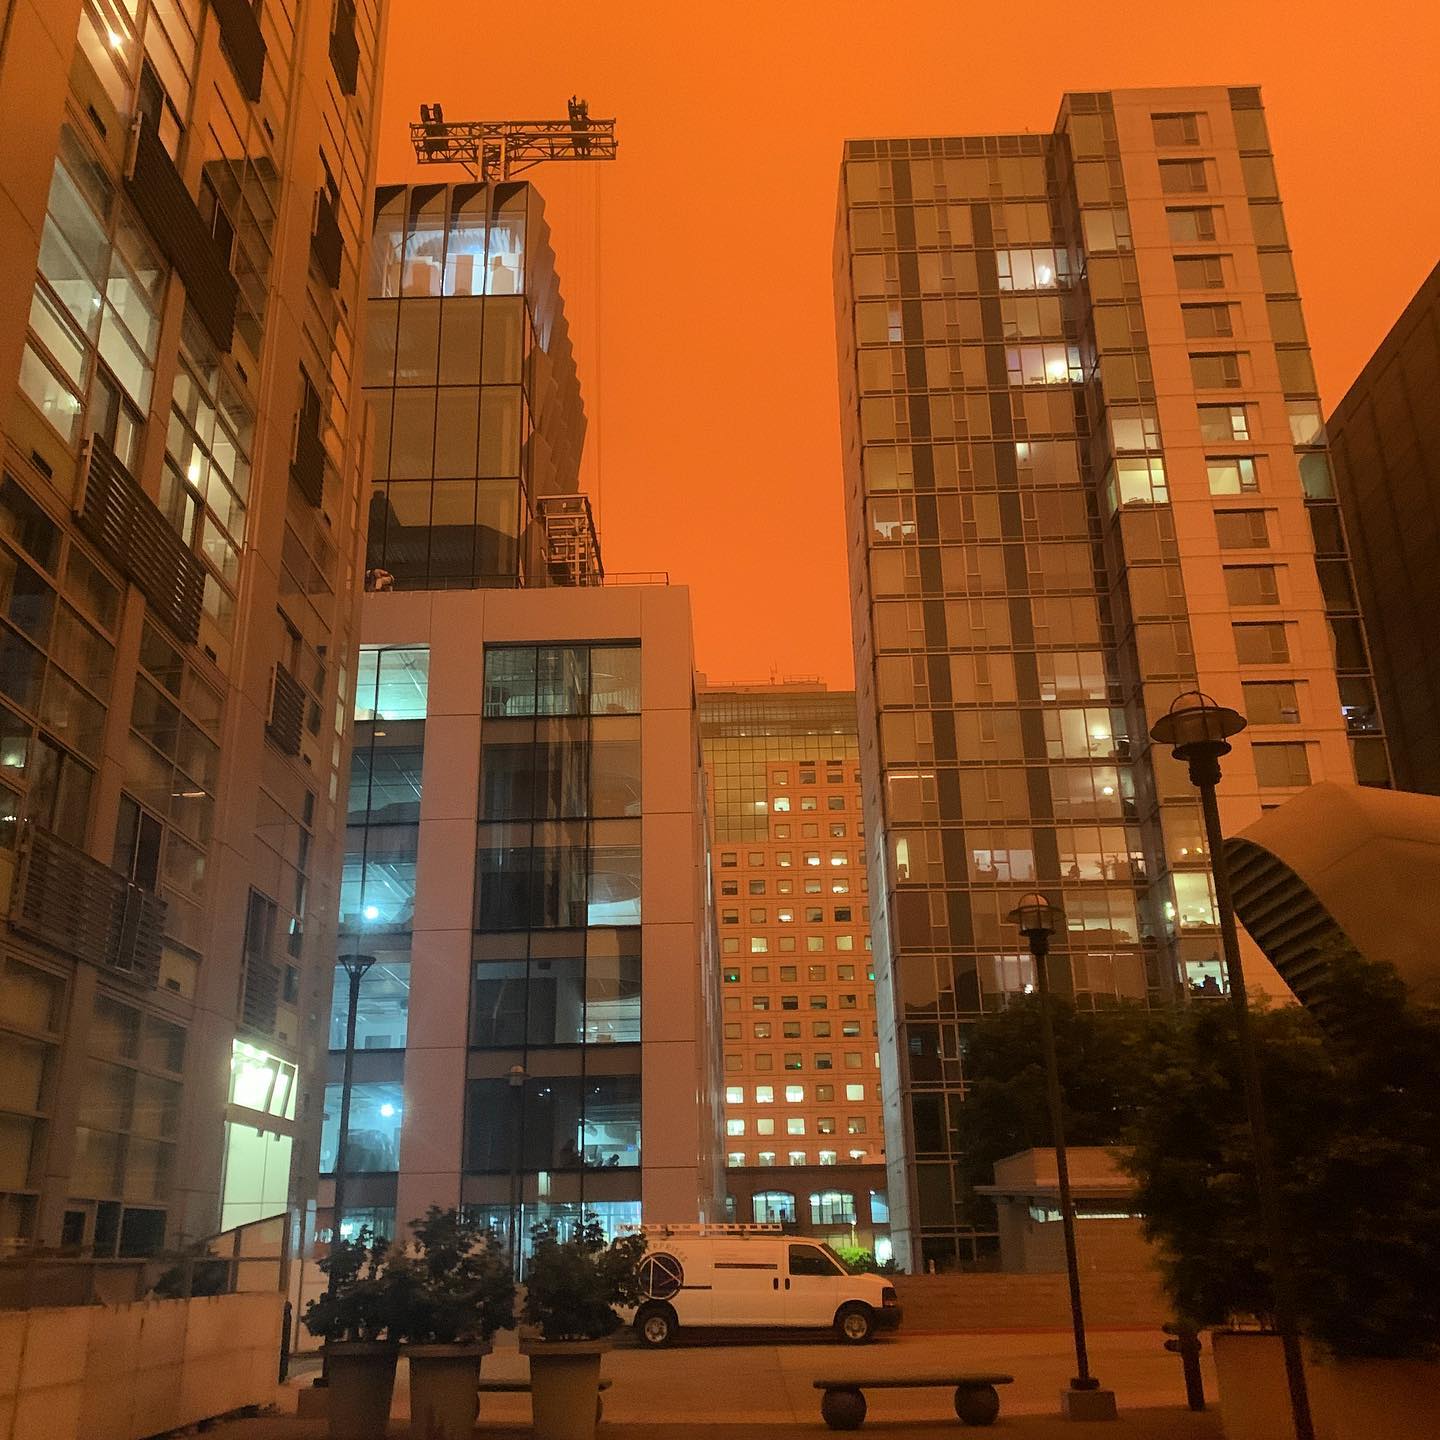 This is outside our building this morning as wildfire smoke in the atmosphere hovered over SF today blocking sunlight and turning the sky a dark, orange haze. It was like night during the day. Hoping the wind shifts and the smoke or ash doesn’t start to drift down. Air last week was pretty bad already. At least there’s no power outage at the same time.